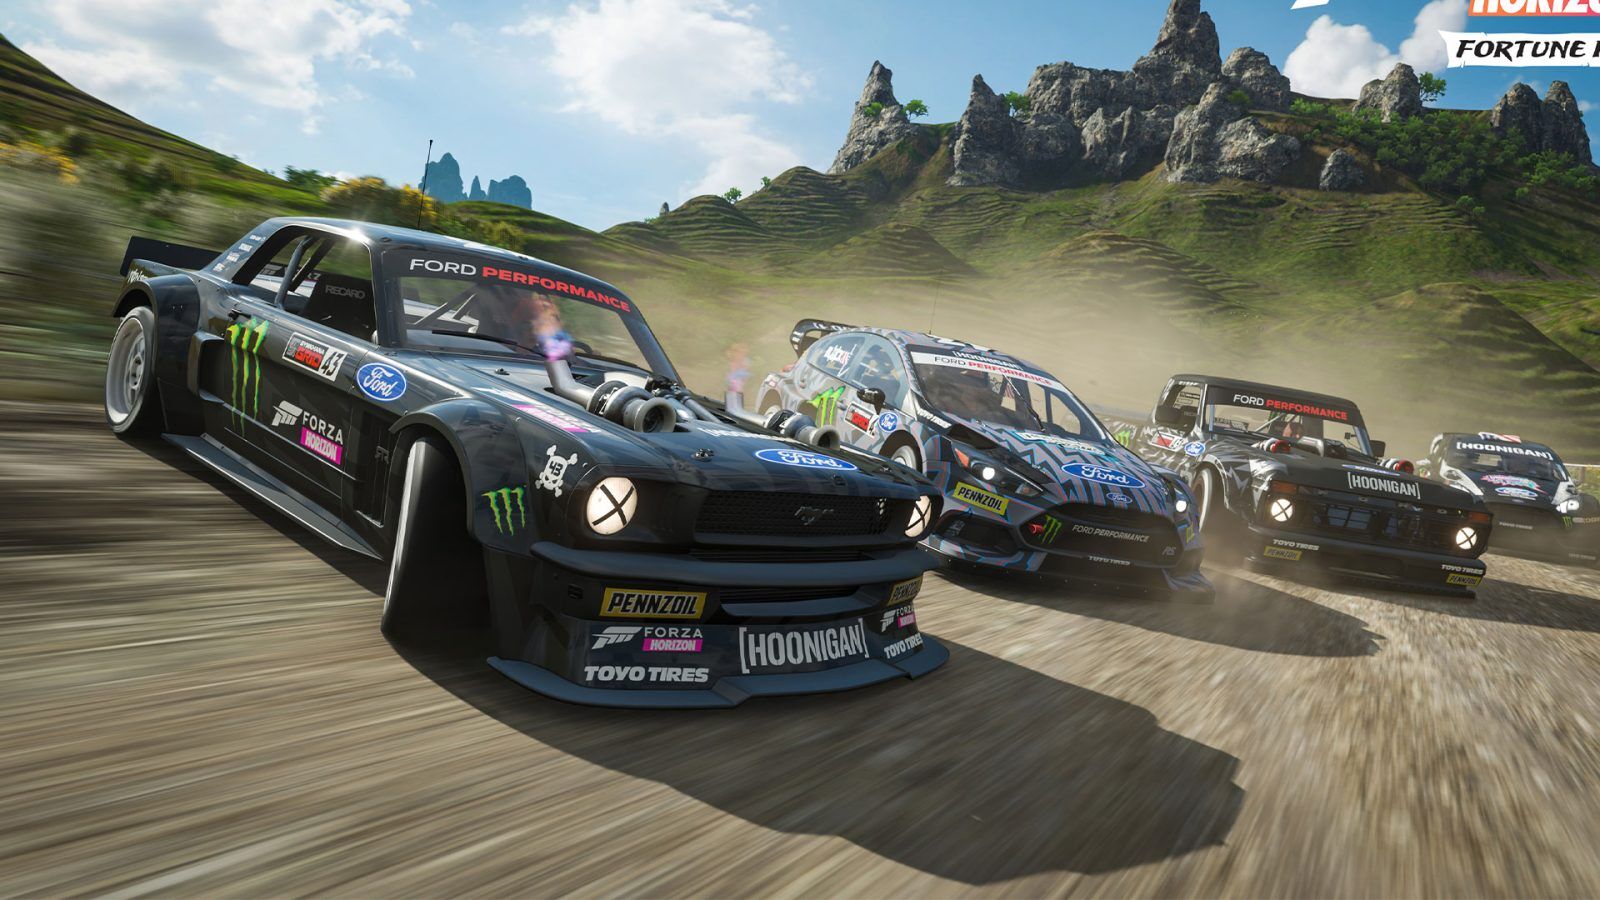 cars drifiting in forza horizon, a ford hoonicorn mustang in the foreground